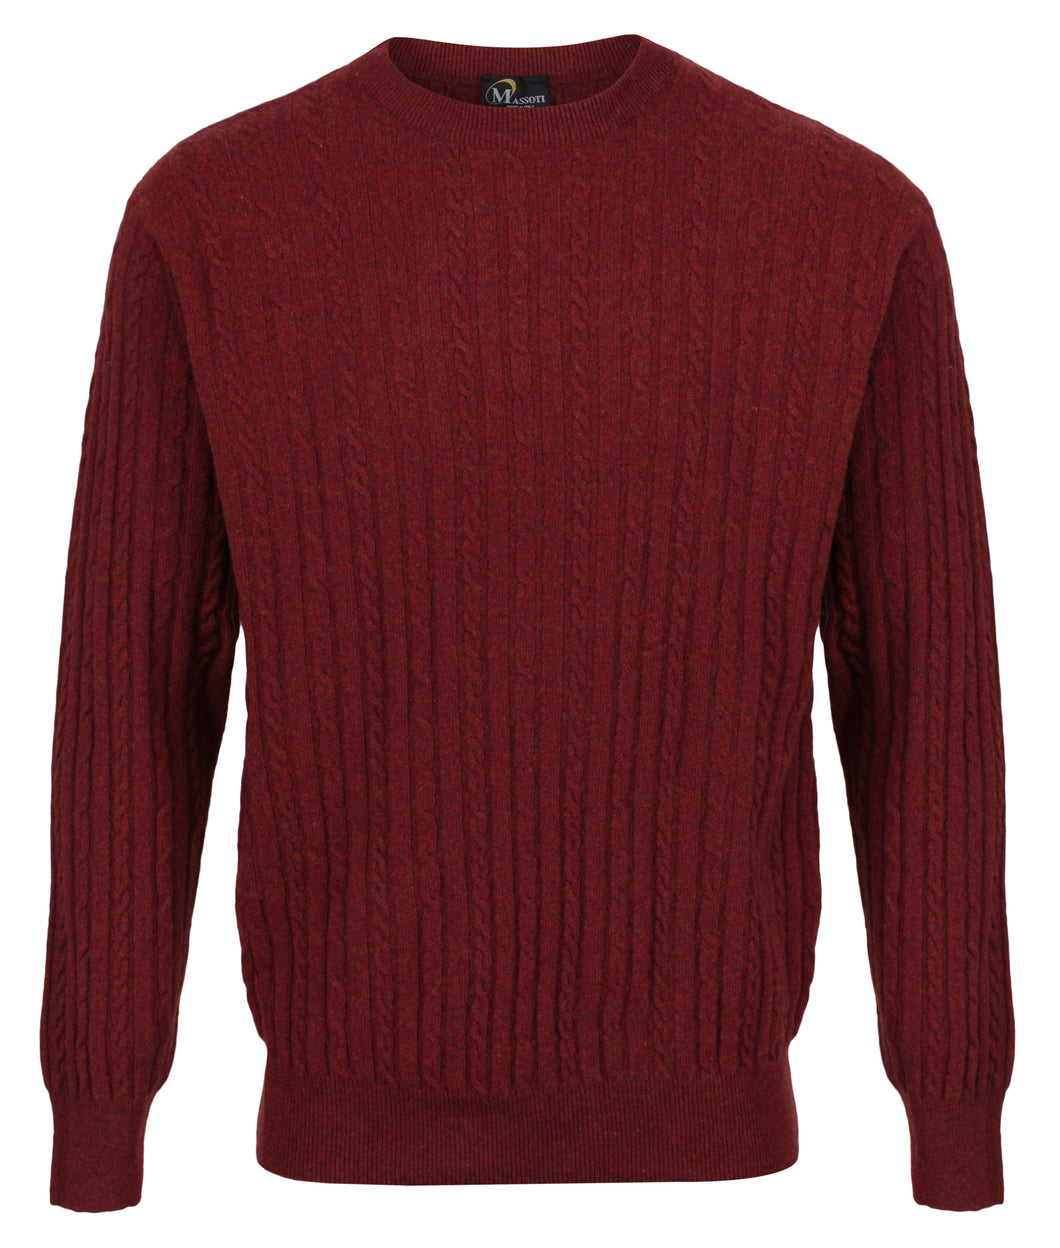 Massoti 100% Lambswool Fine Cable Knit Jumper - Crew Neck